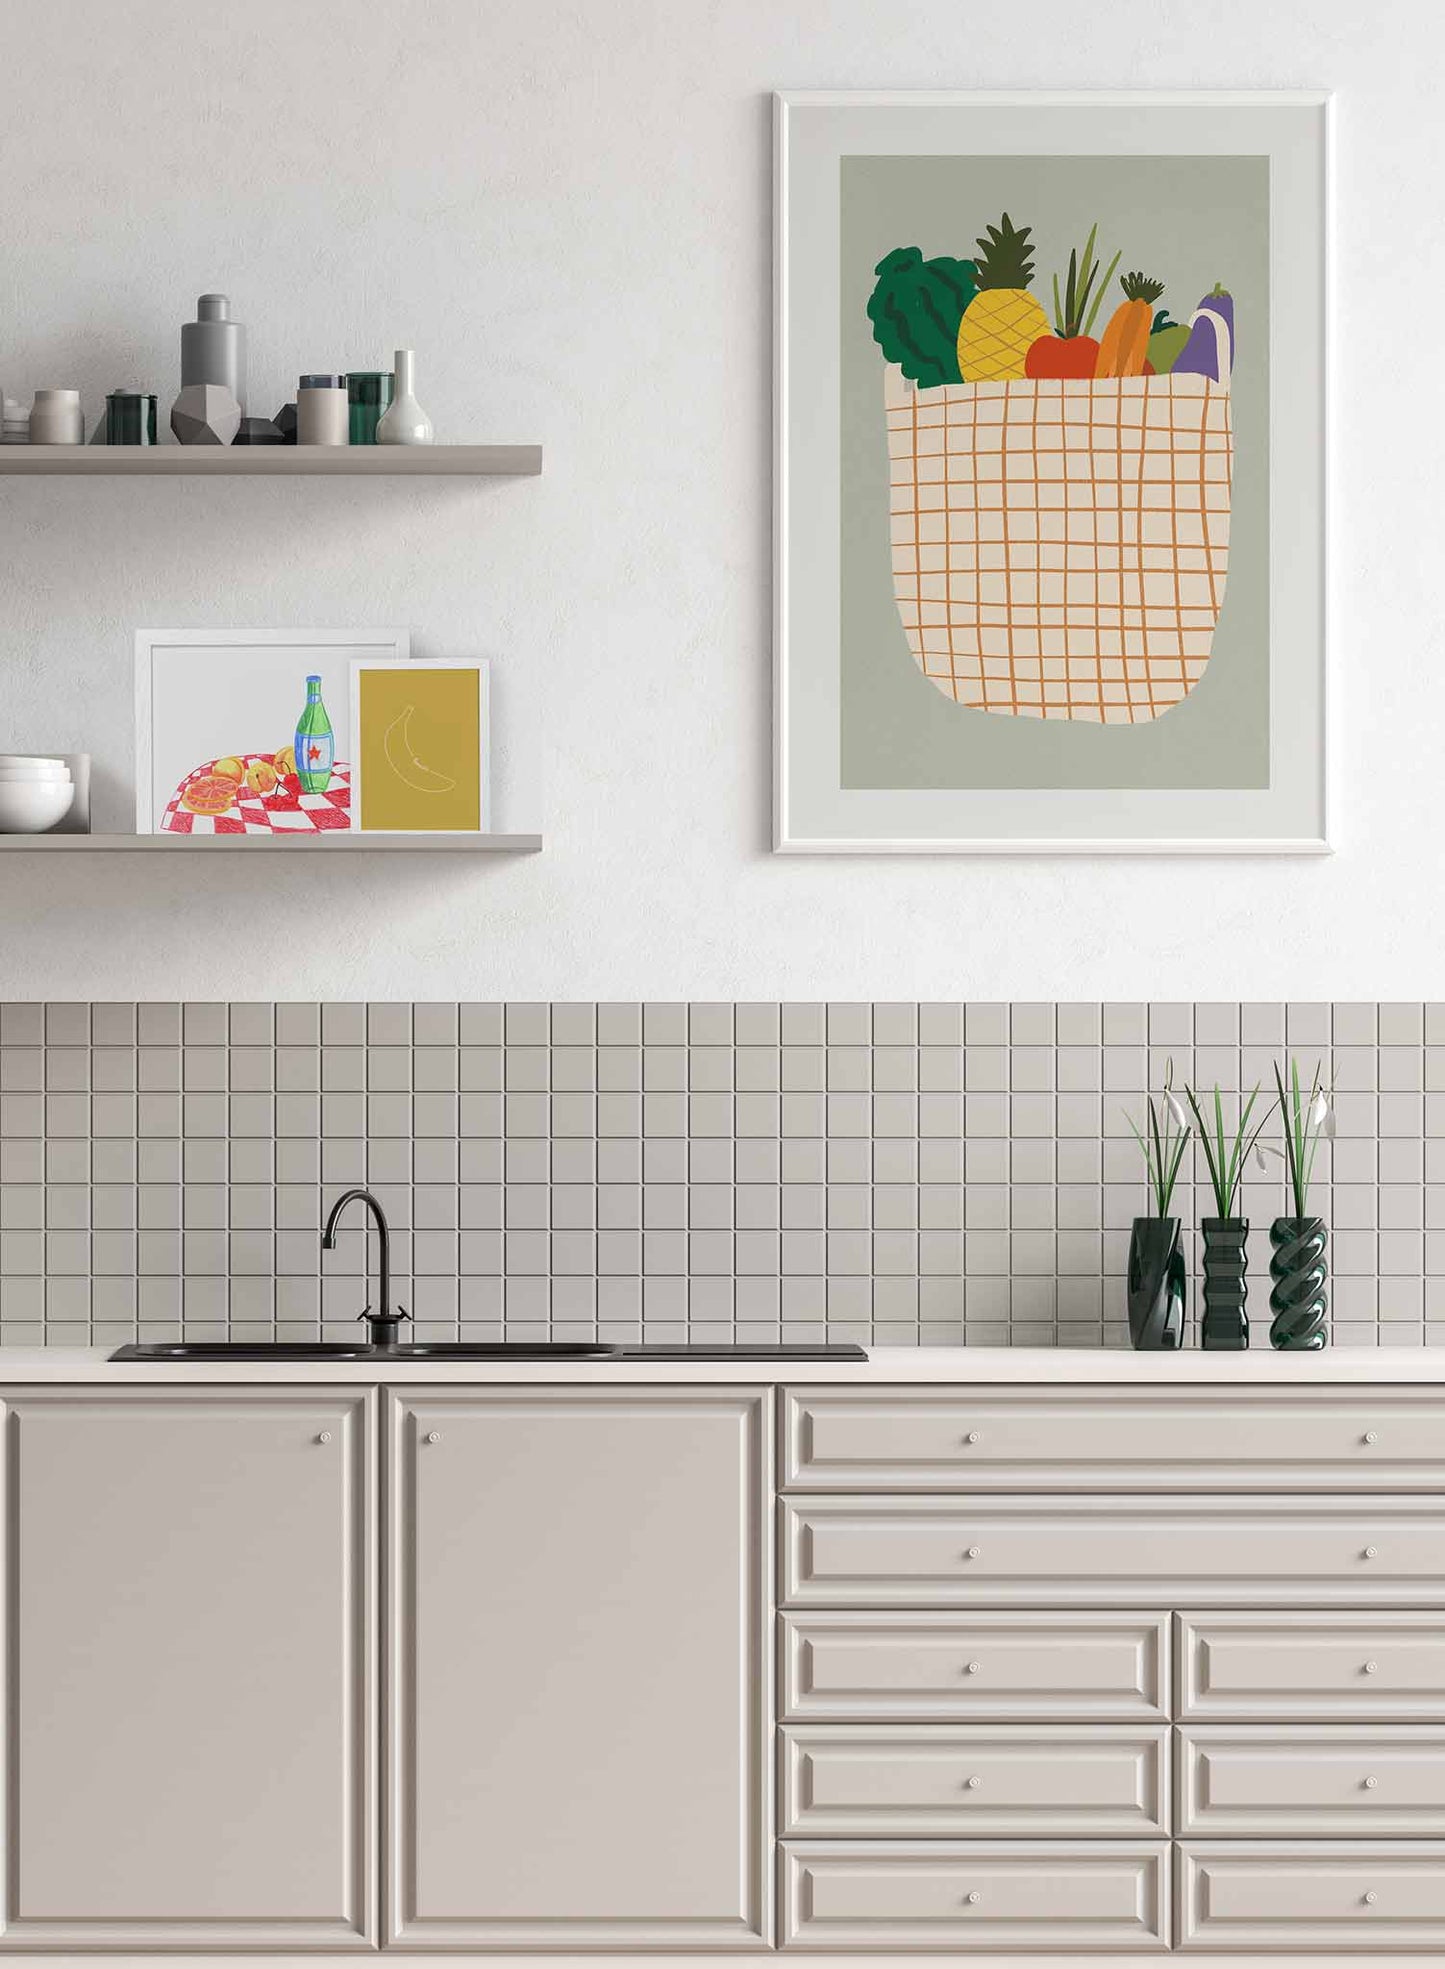 The Groceries is a fruit and veggie illustration poster by Opposite Wall.